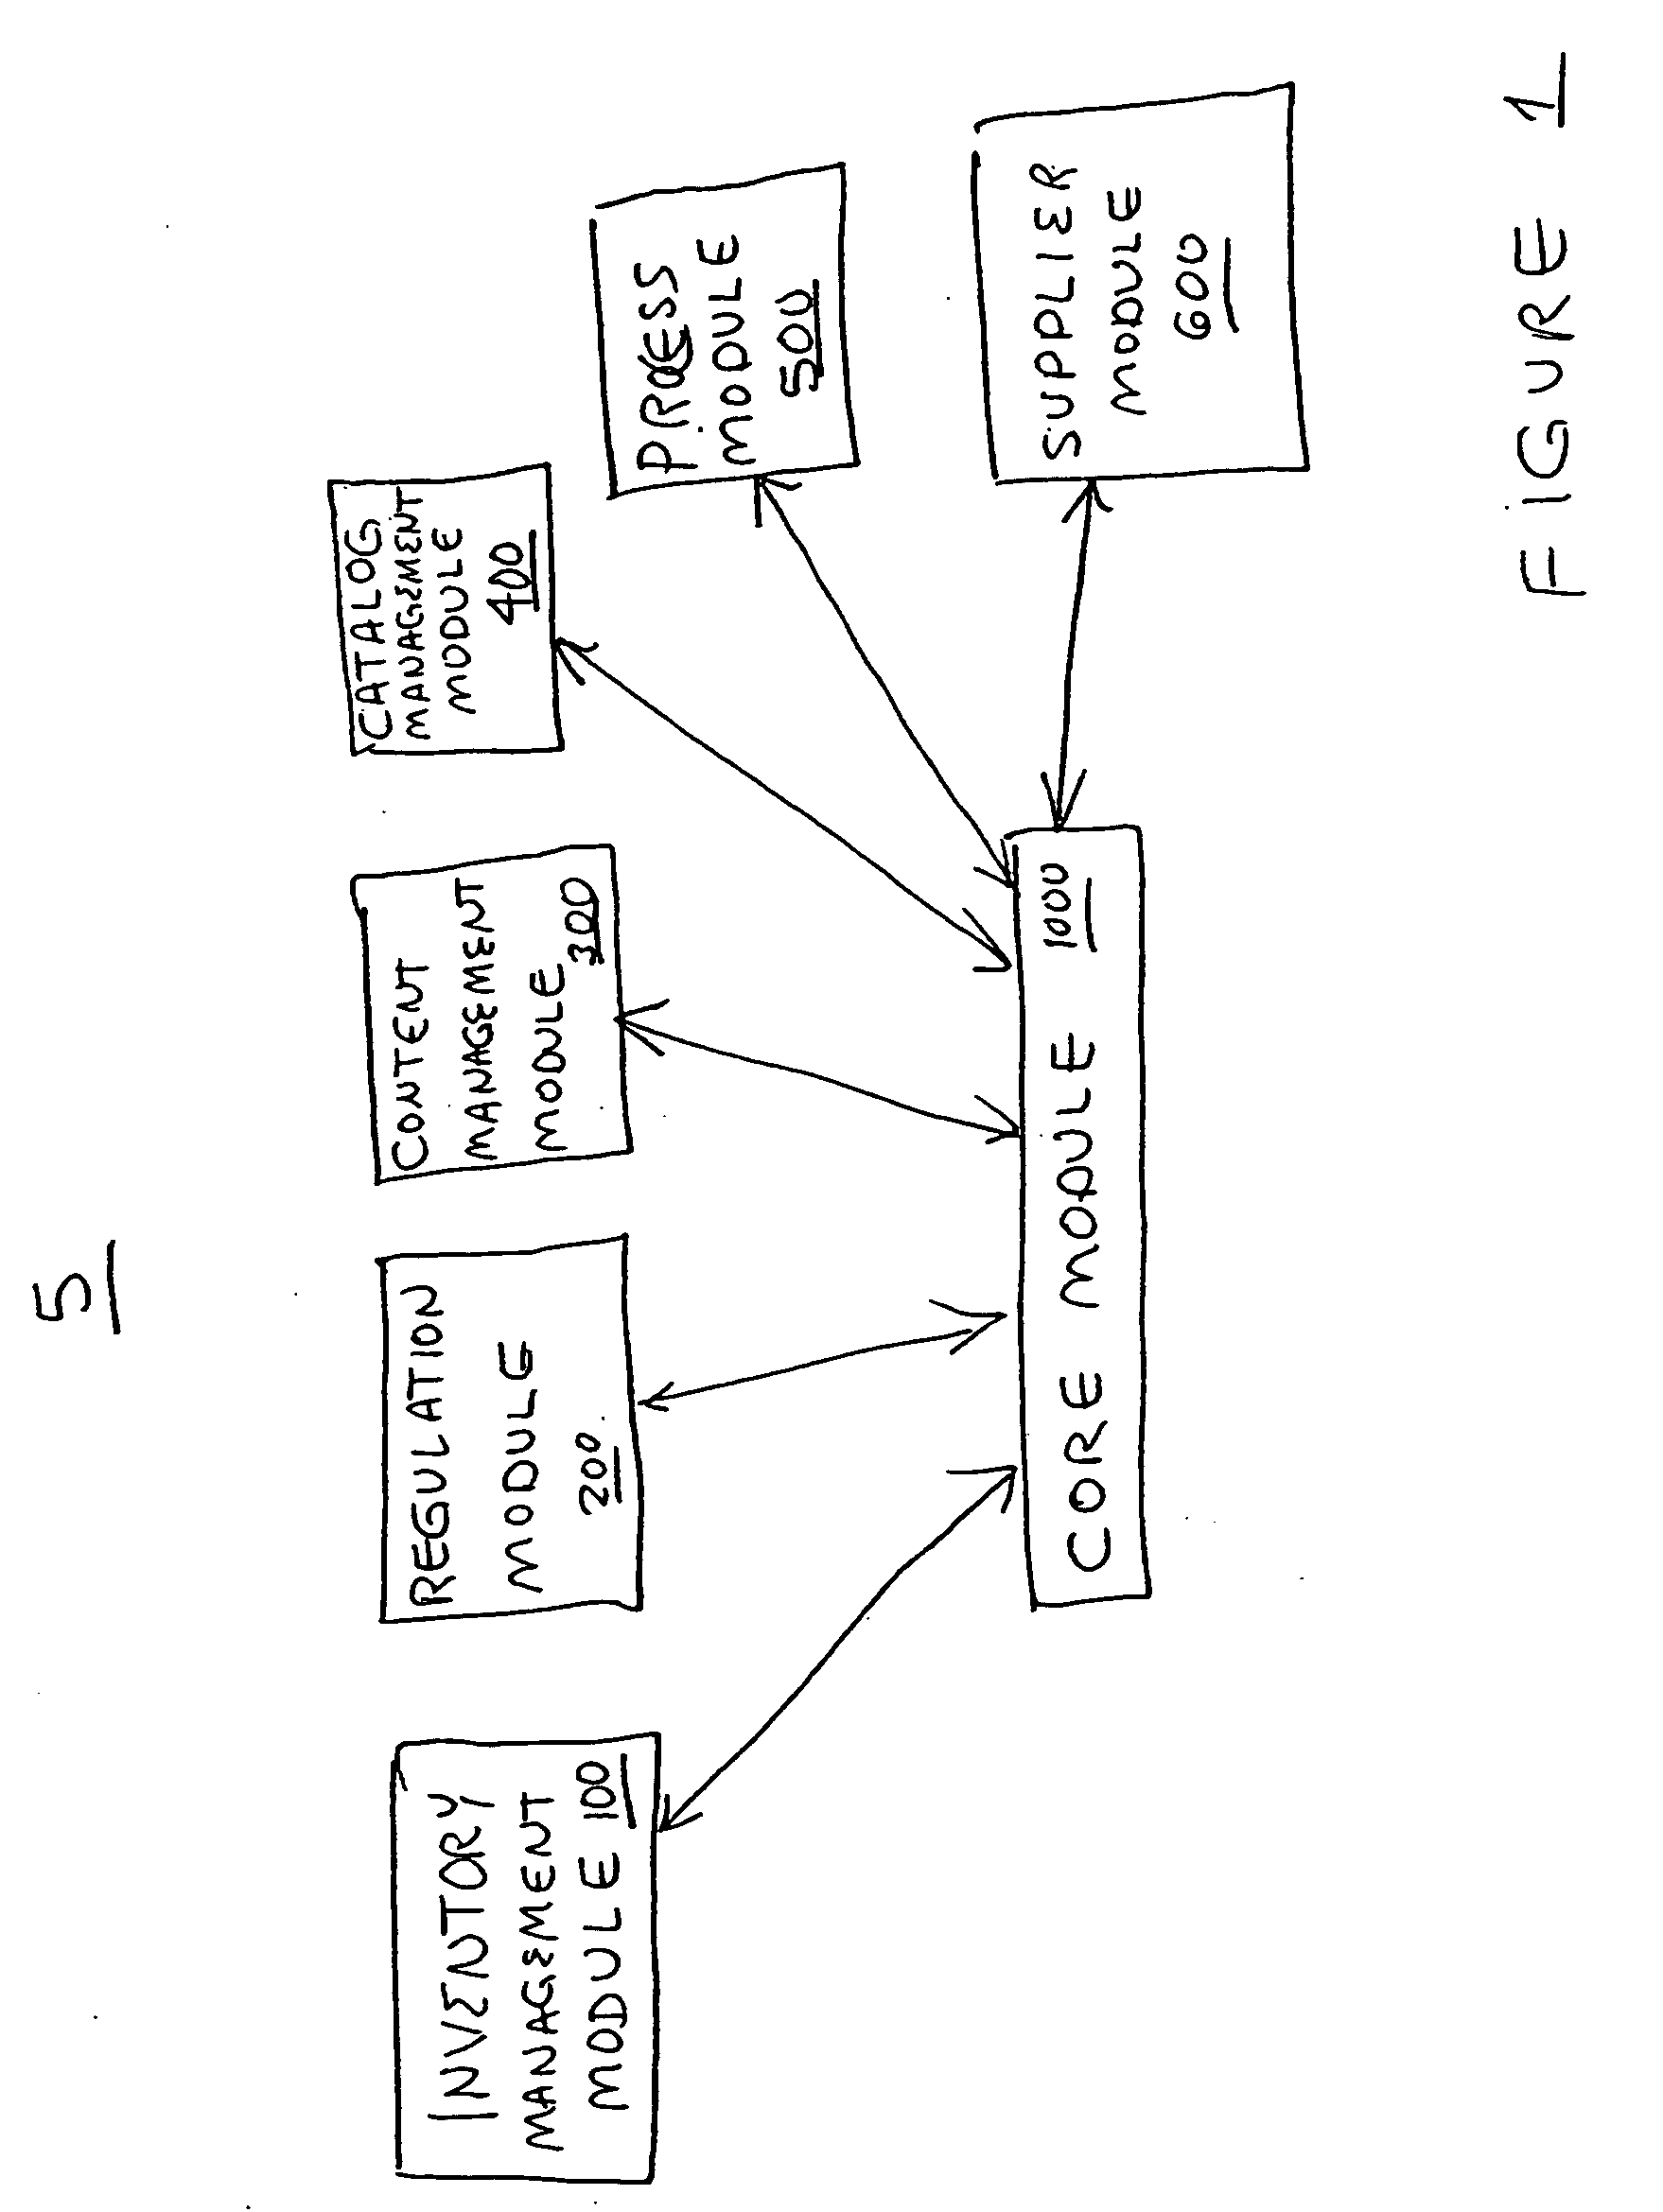 System and method for managing the development and manufacturing of a pharmaceutical drug